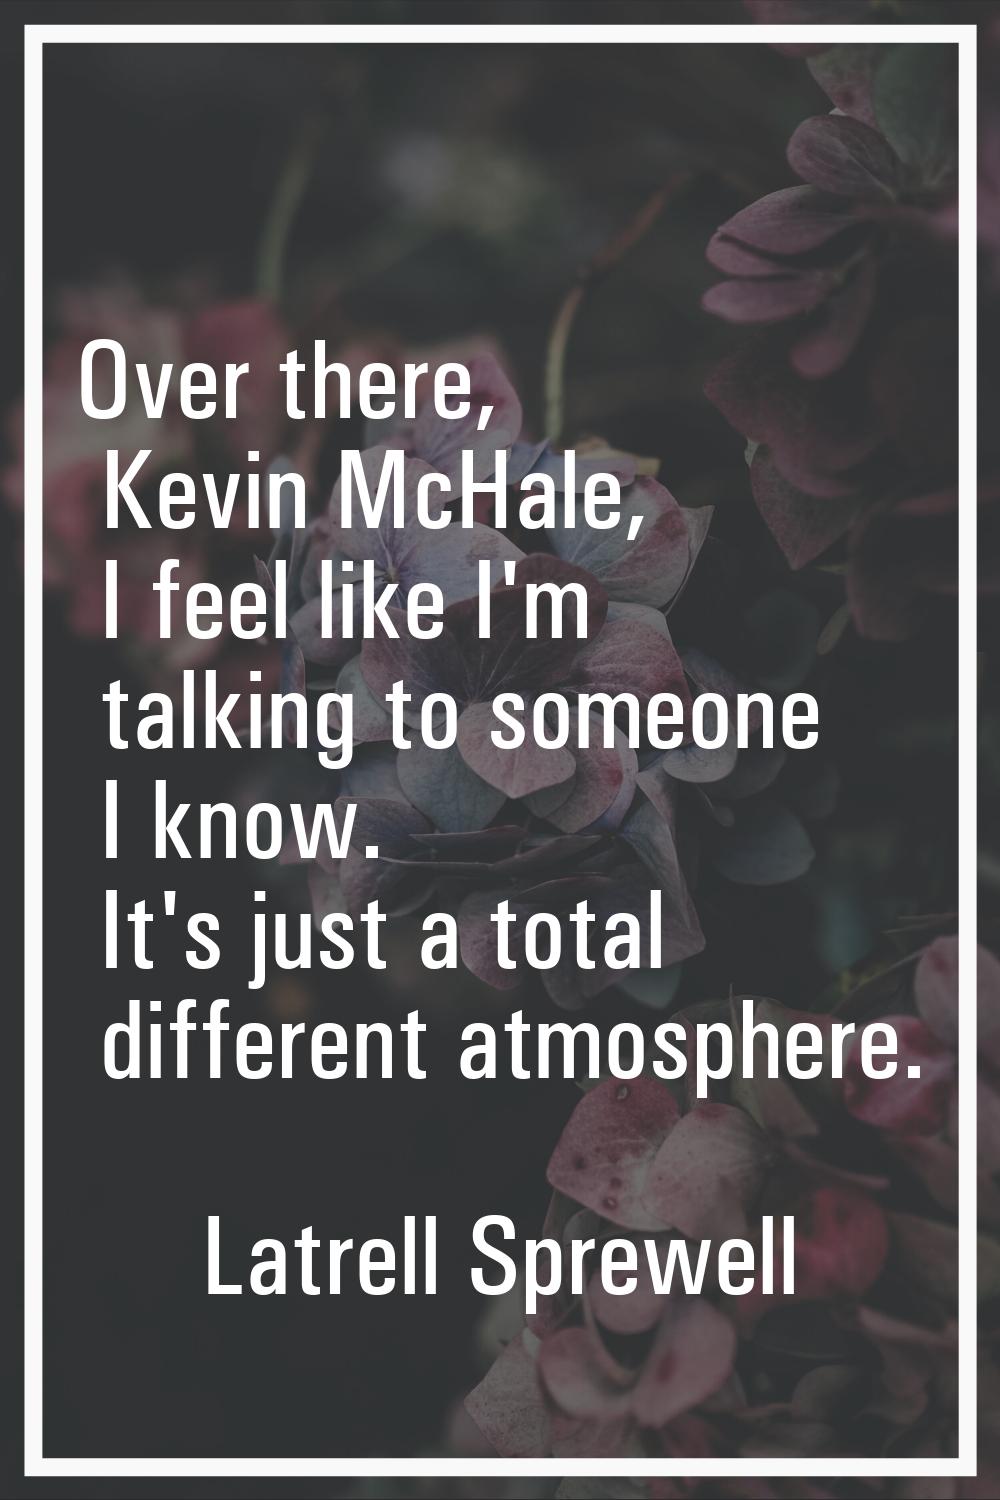 Over there, Kevin McHale, I feel like I'm talking to someone I know. It's just a total different at